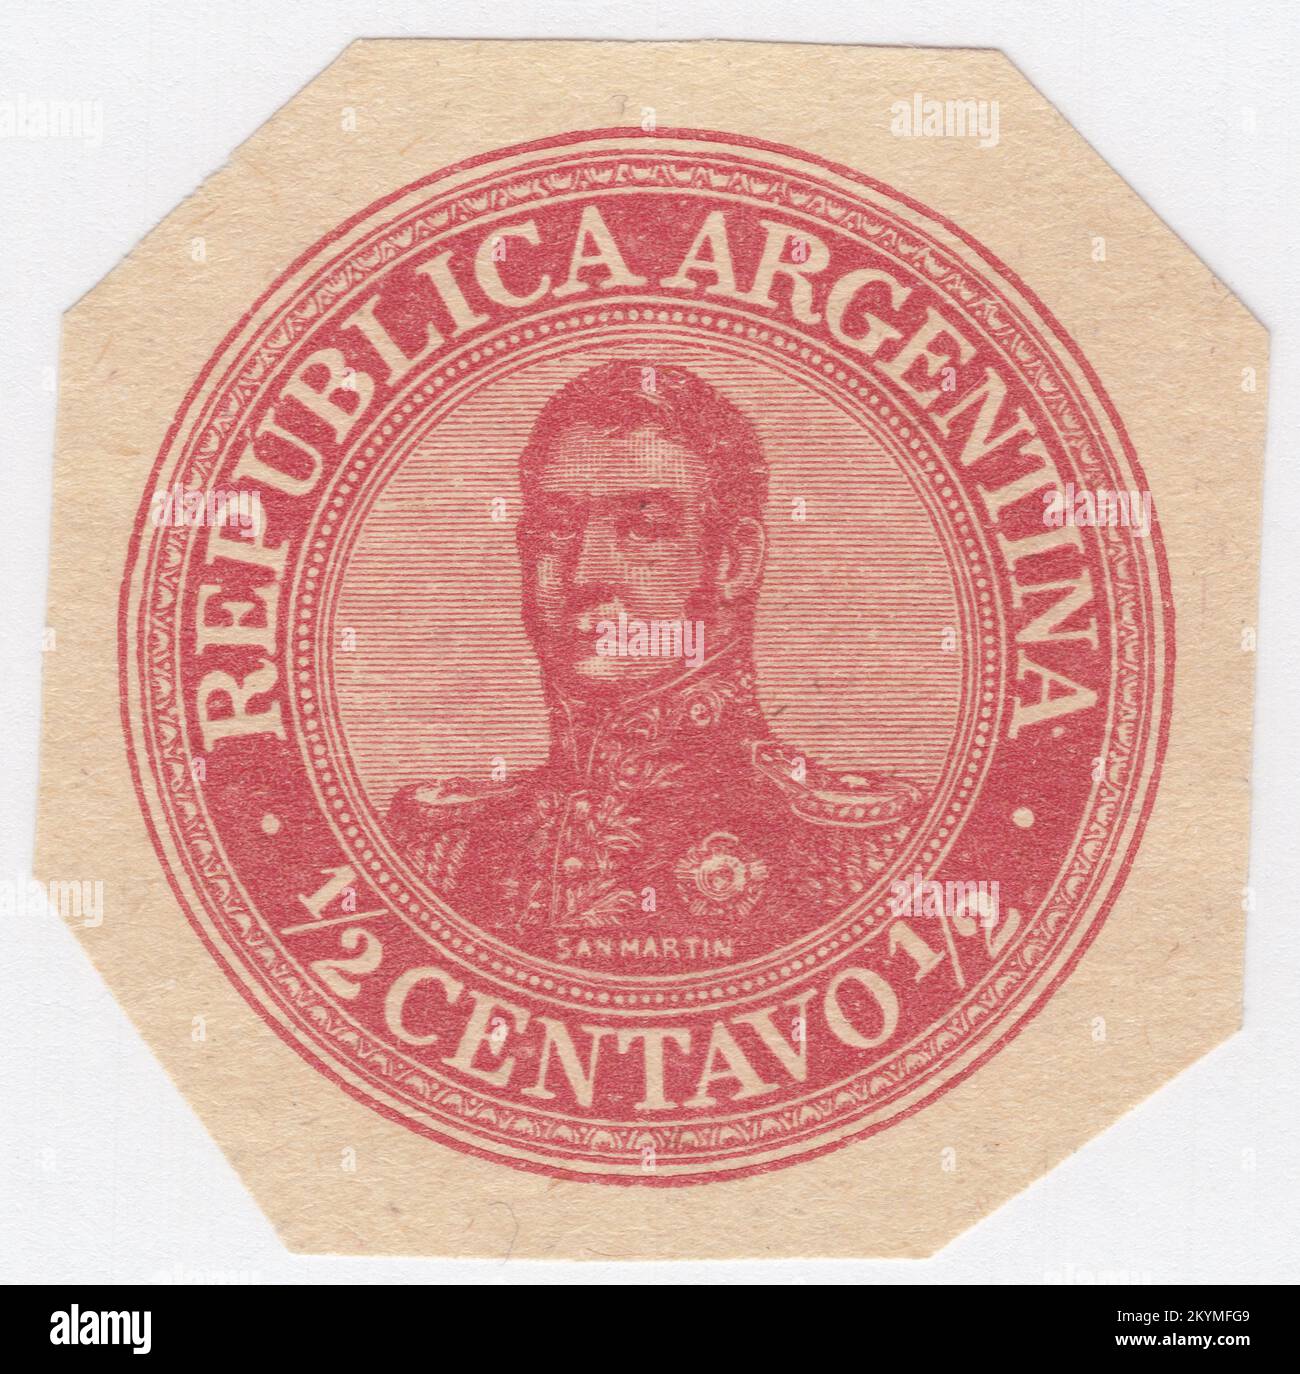 ARGENTINA - 1902: An fragment of original envelope with pre-printed ½ centavo lake postage stamp depicting portrait of José de San Martín (Jose Francisco de San Martín y Matorras), known as the Liberator of Argentina, Chile and Peru. Argentine general and the primary leader of the southern and central parts of South America's successful struggle for independence from the Spanish Empire who served as the Protector of Peru. Born in Yapeyú, Corrientes, in modern-day Argentina, he left the Viceroyalty of the Río de la Plata at the early age of seven to study in Málaga, Spain Stock Photo